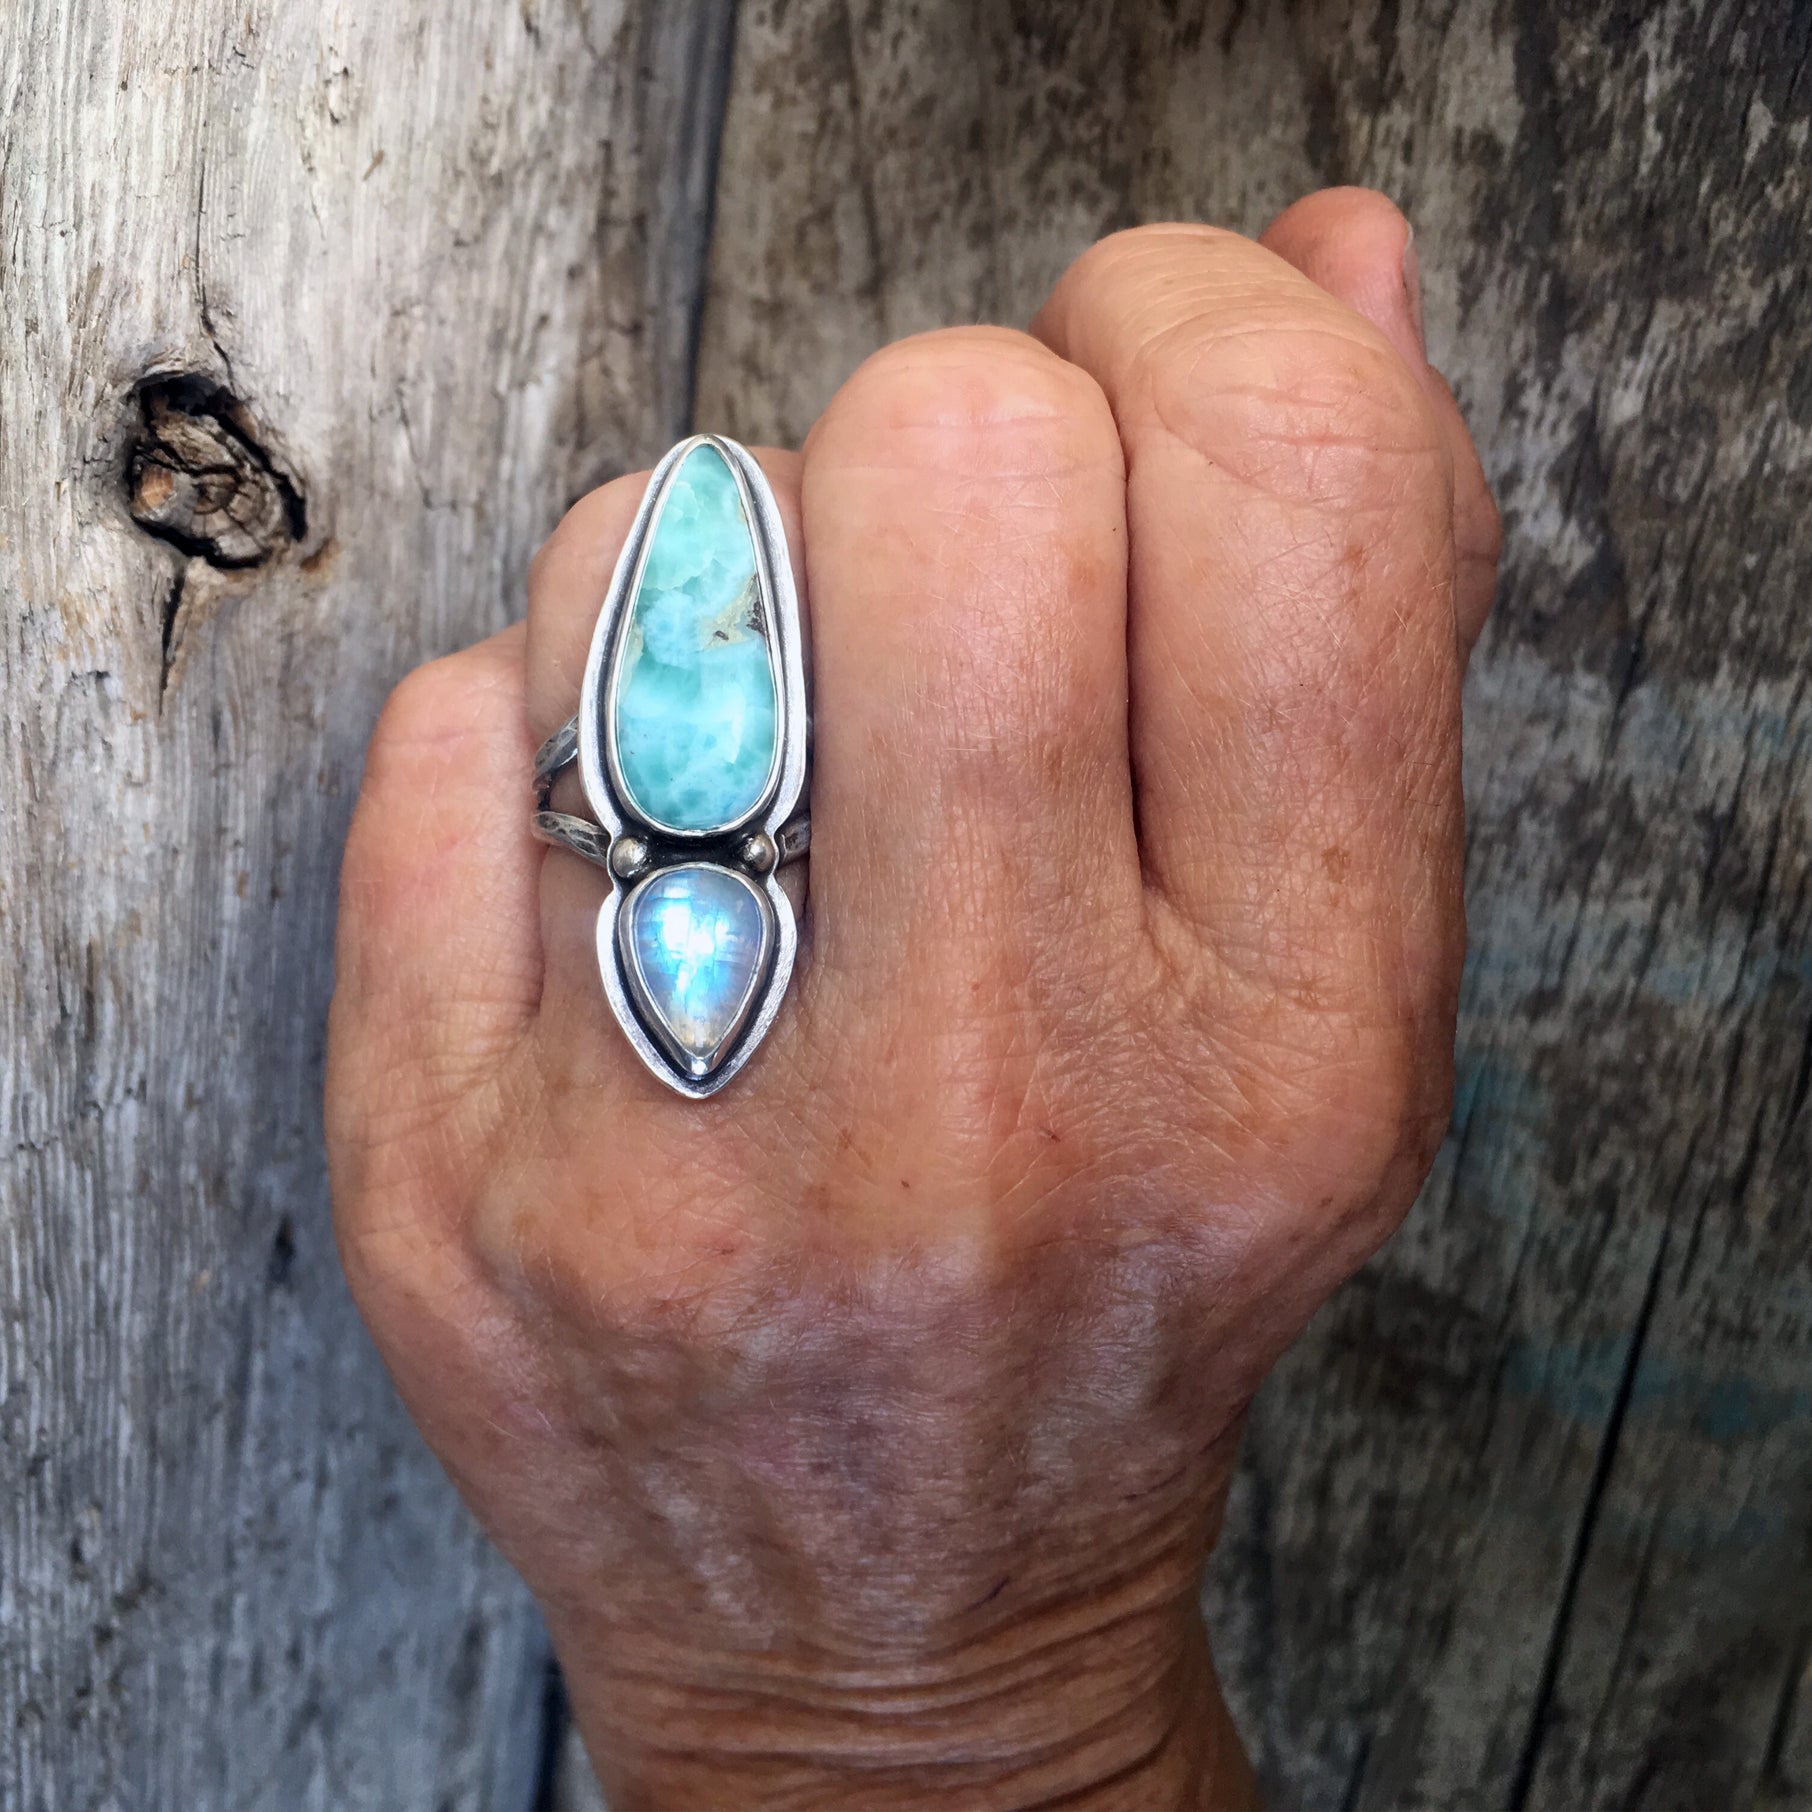 Double Amulet Ring with Larimar and Moonstone Shown on Hand